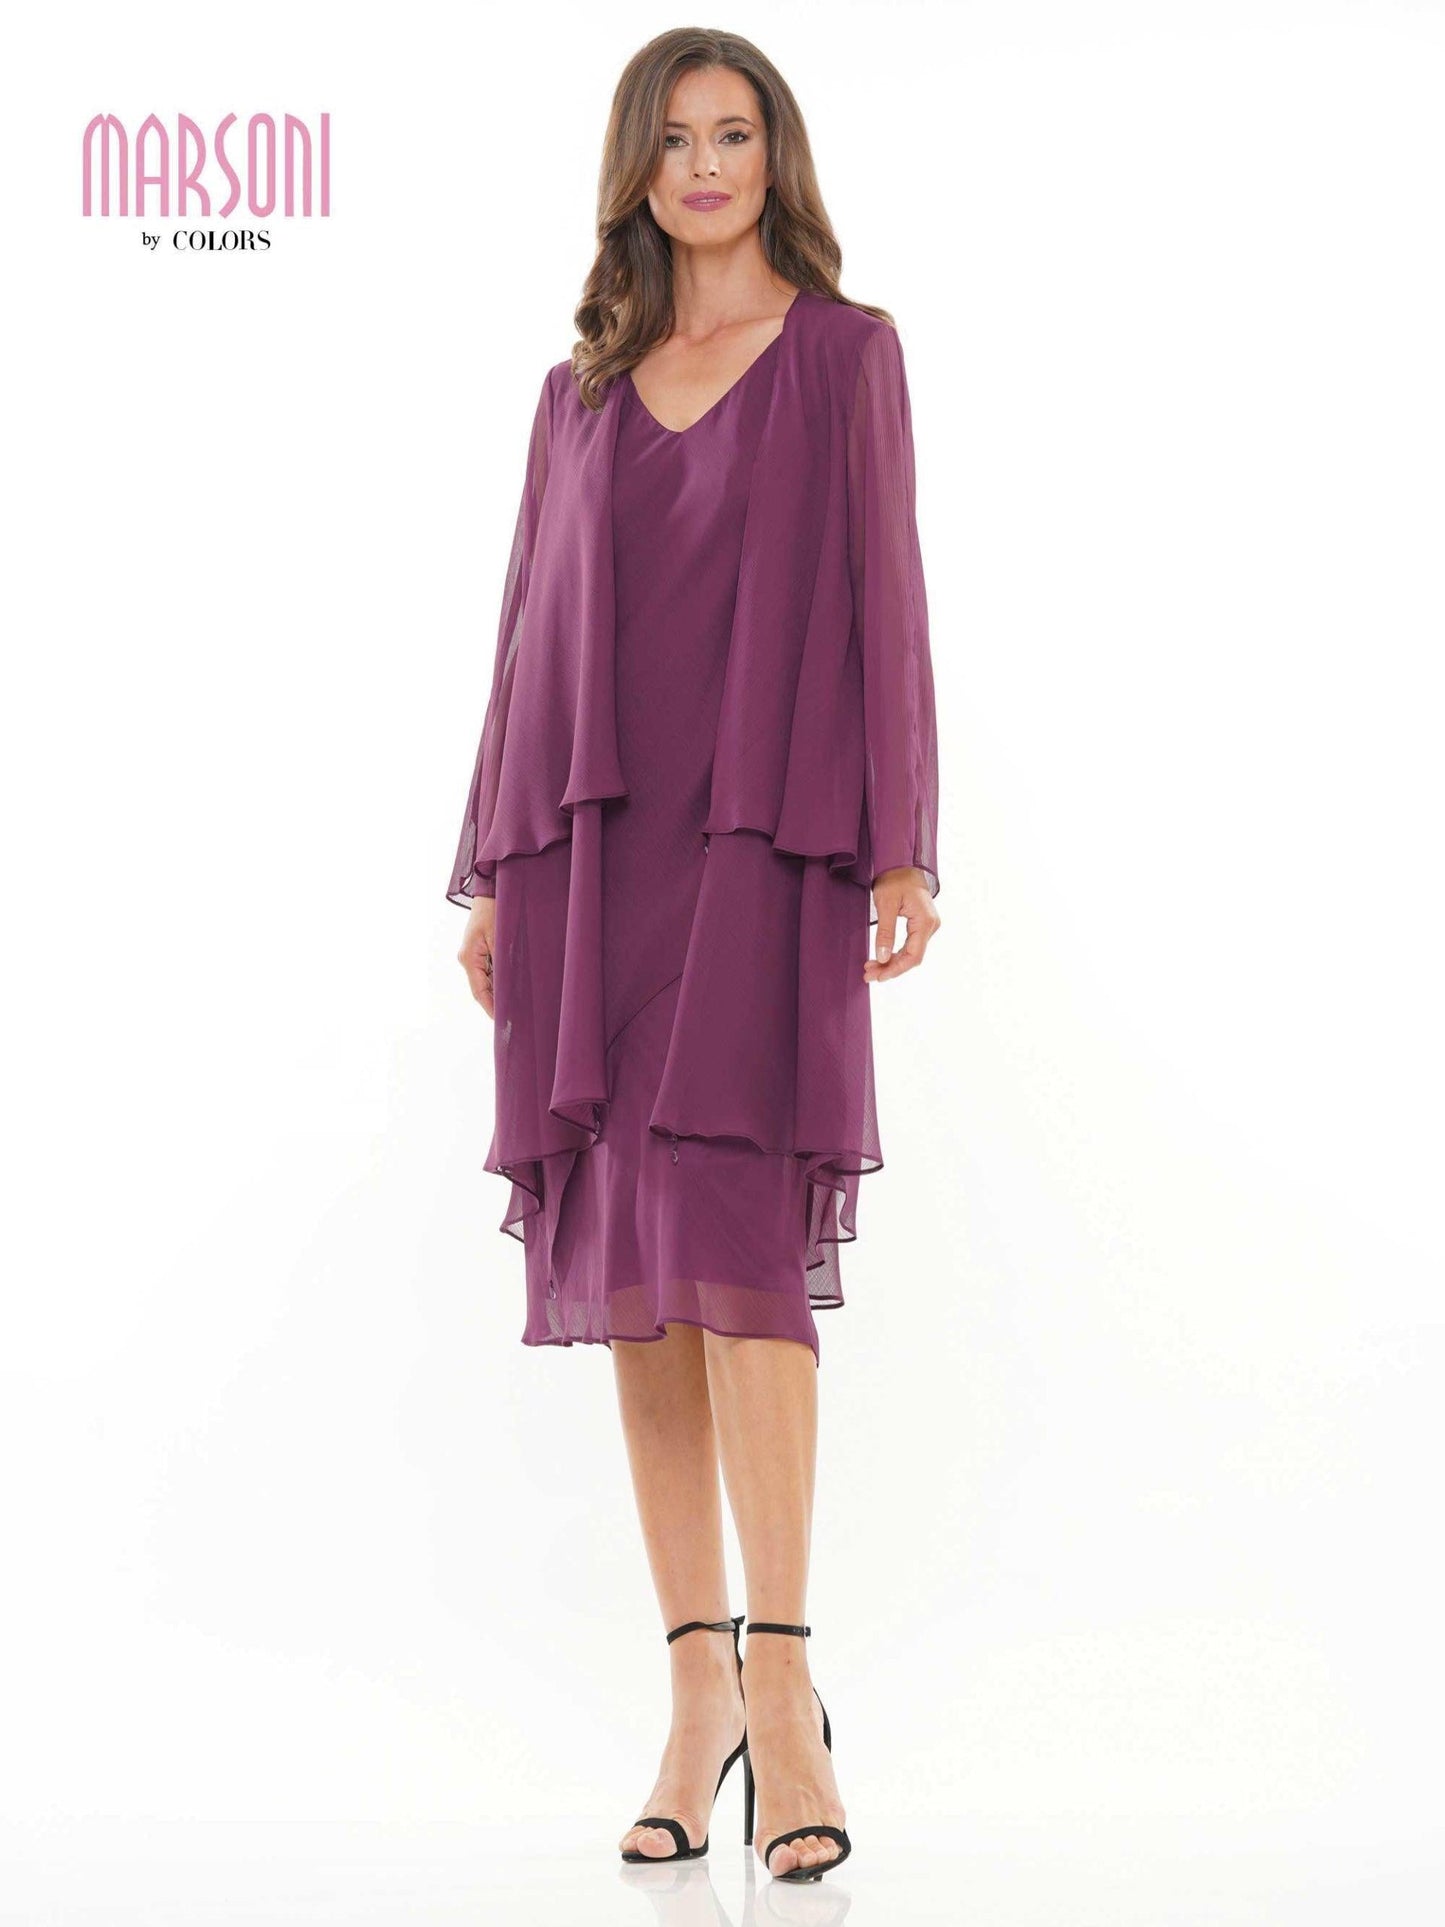 Marsoni Short Mother of the Bride Chiffon Dress 307 - The Dress Outlet